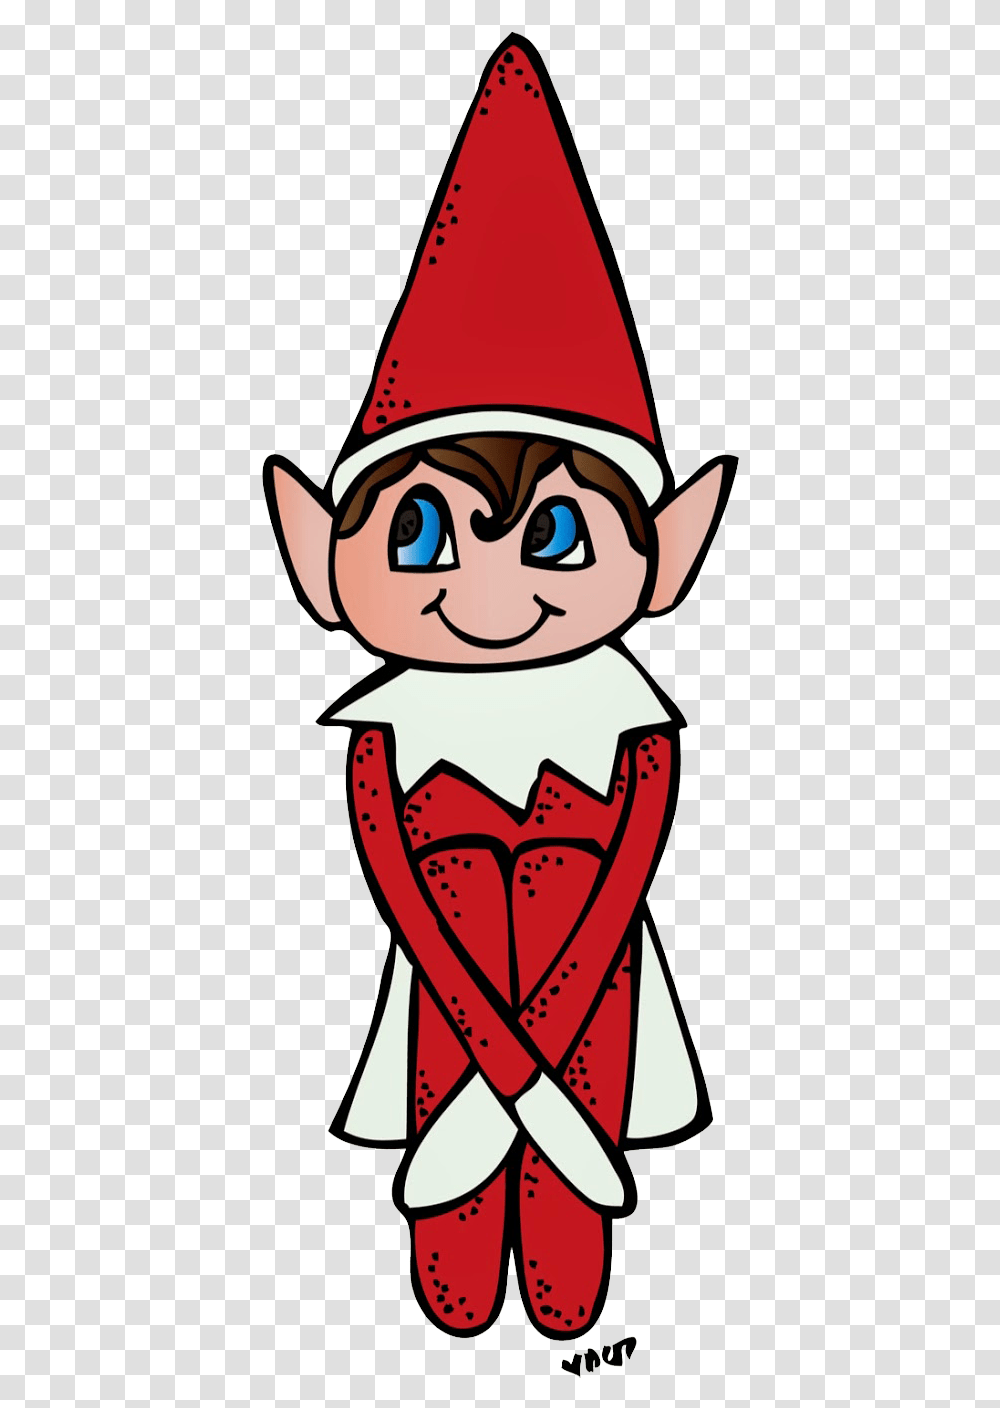 Clip Art Elf On The Shelf Elf On The Shelf Clipart, Book, Weapon, Weaponry, Comics Transparent Png